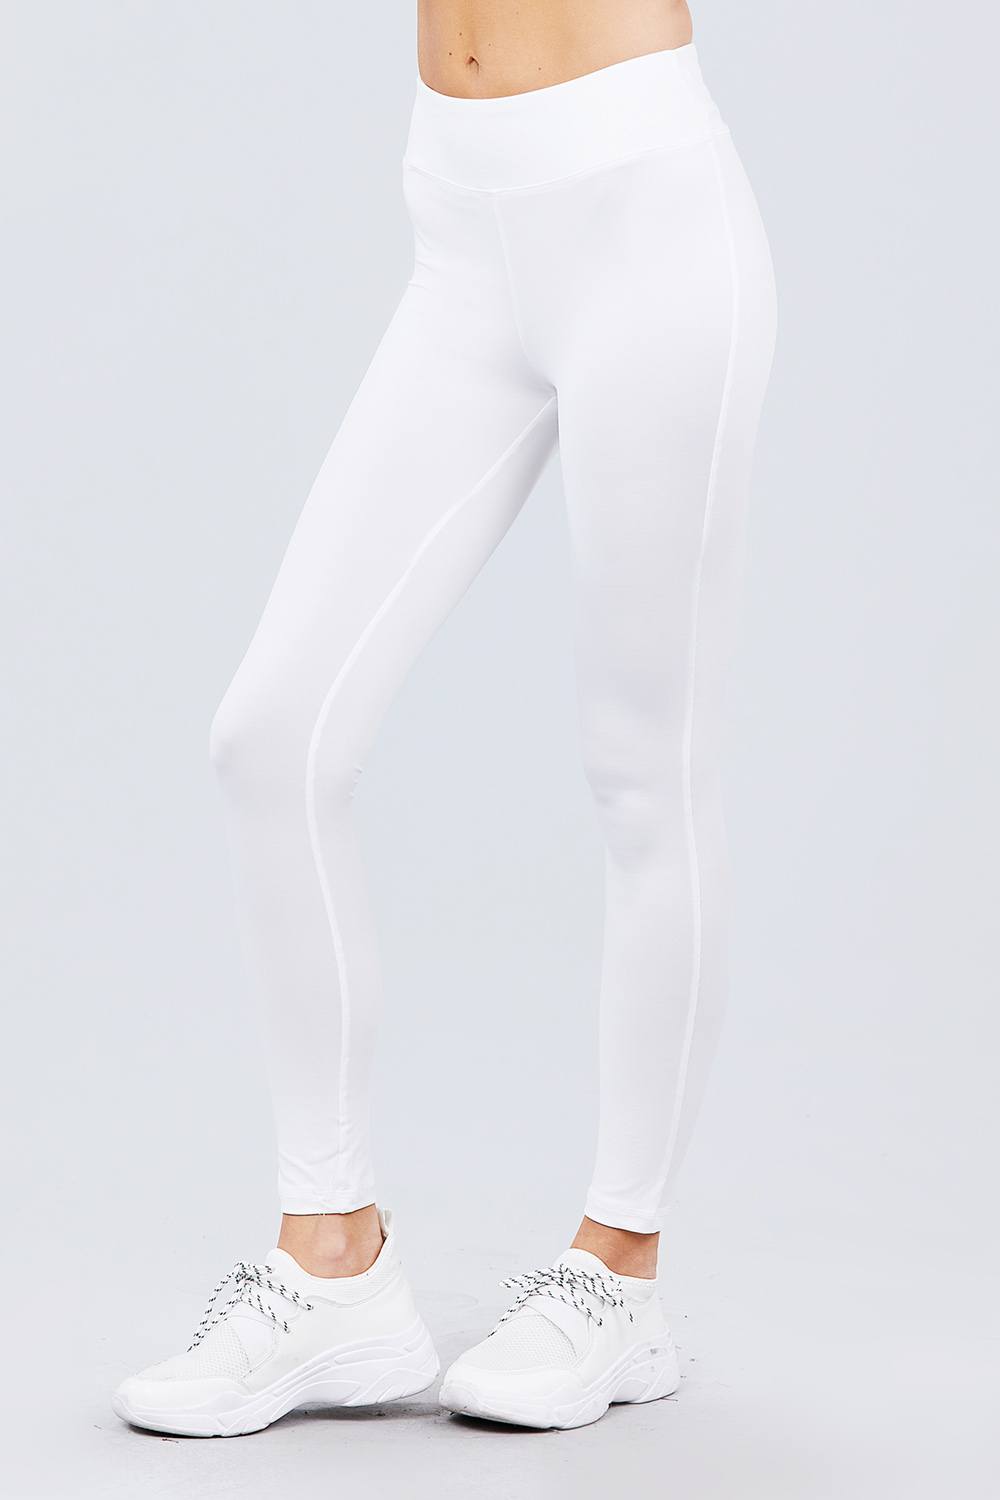 Our Best 90% Polyester 10% Spandex Long Workout/Jogger Activewear Pants (Off White)